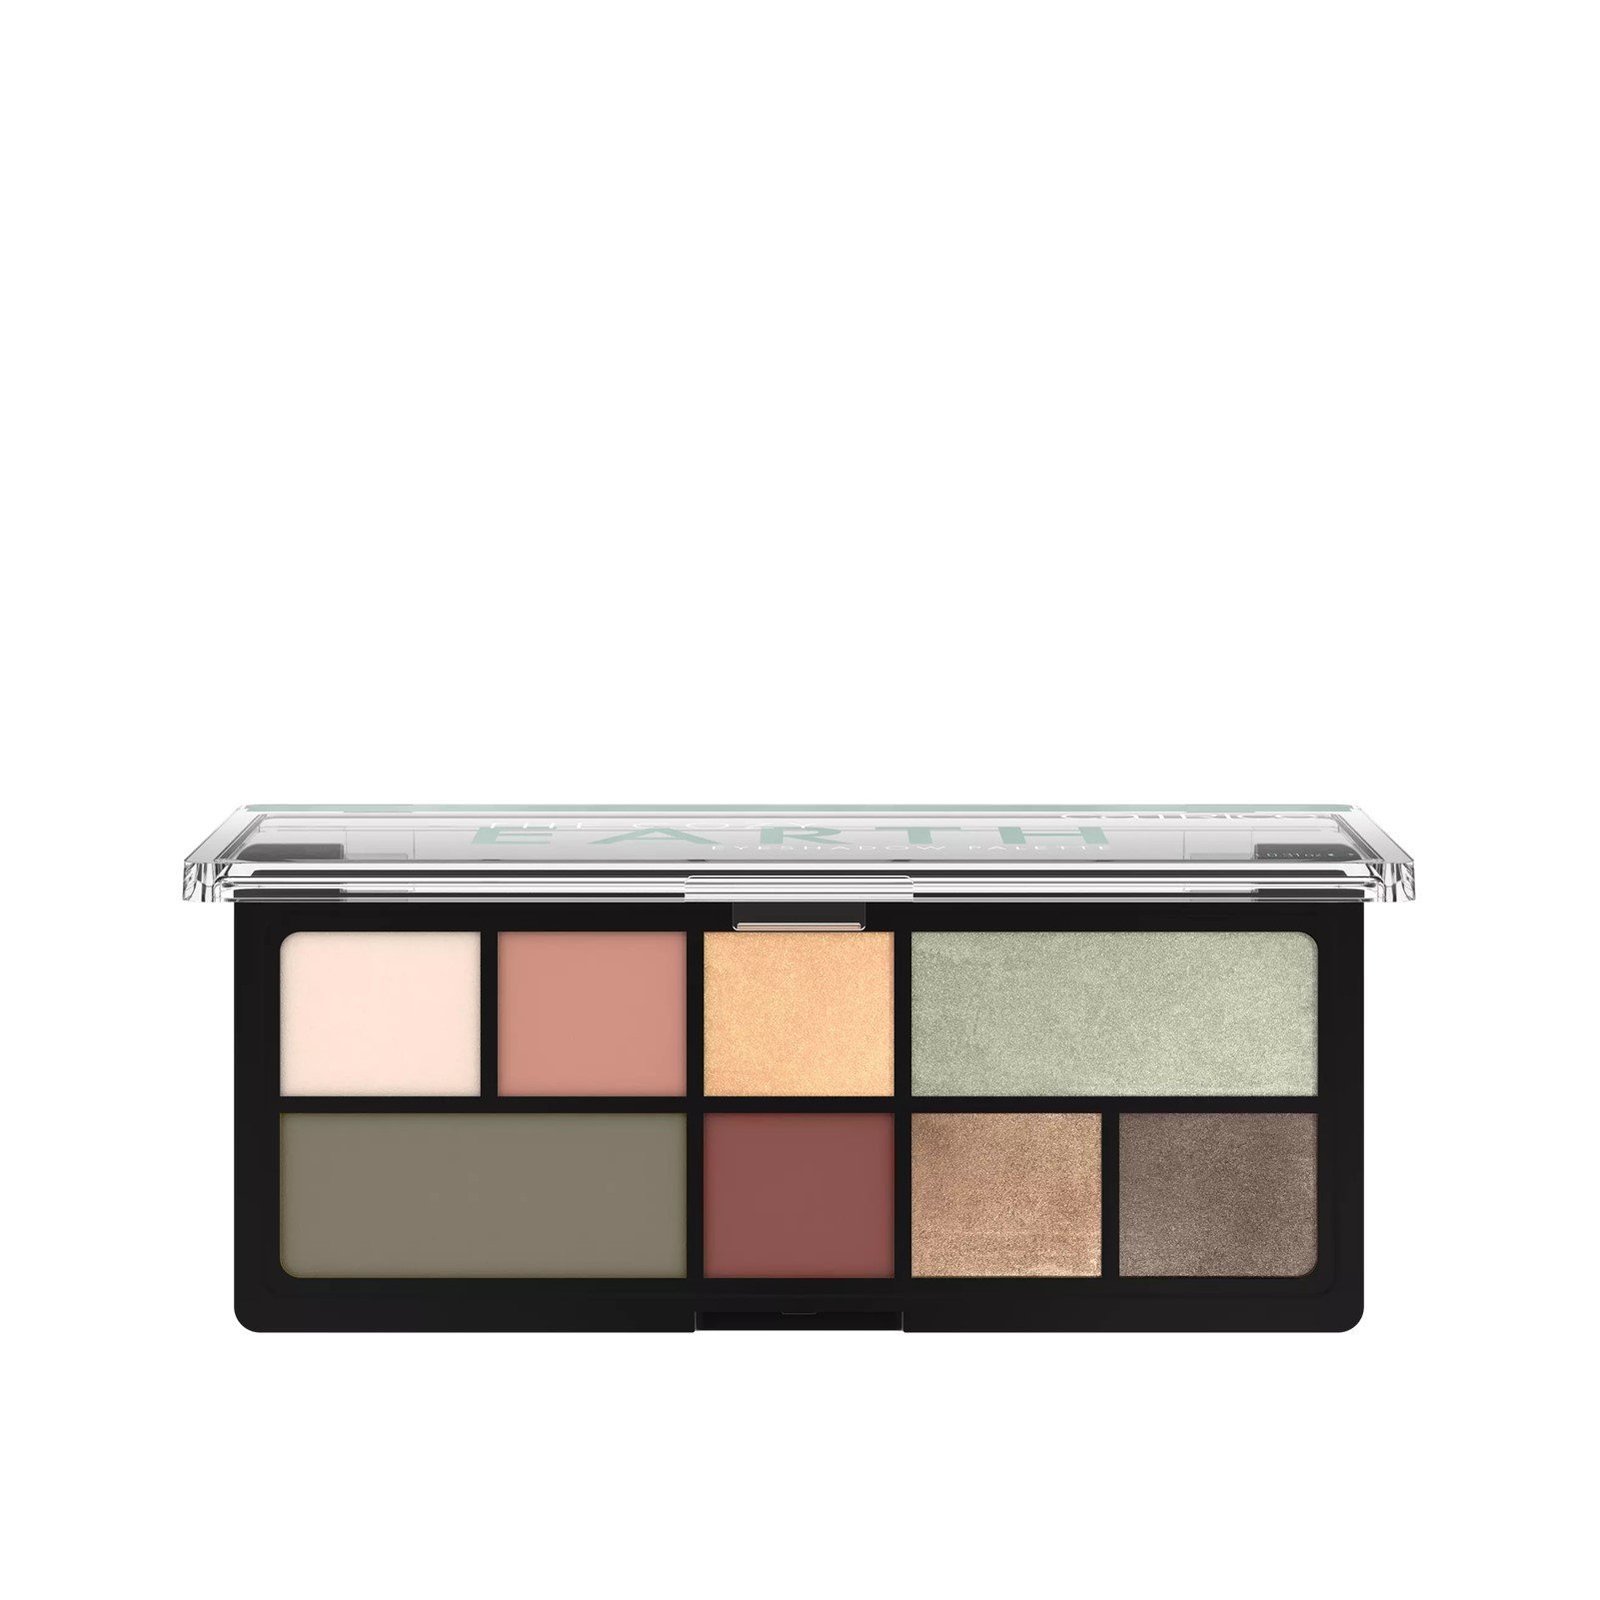 Earth Catrice (0.31 · Cozy oz) Palette Buy The USA Eyeshadow